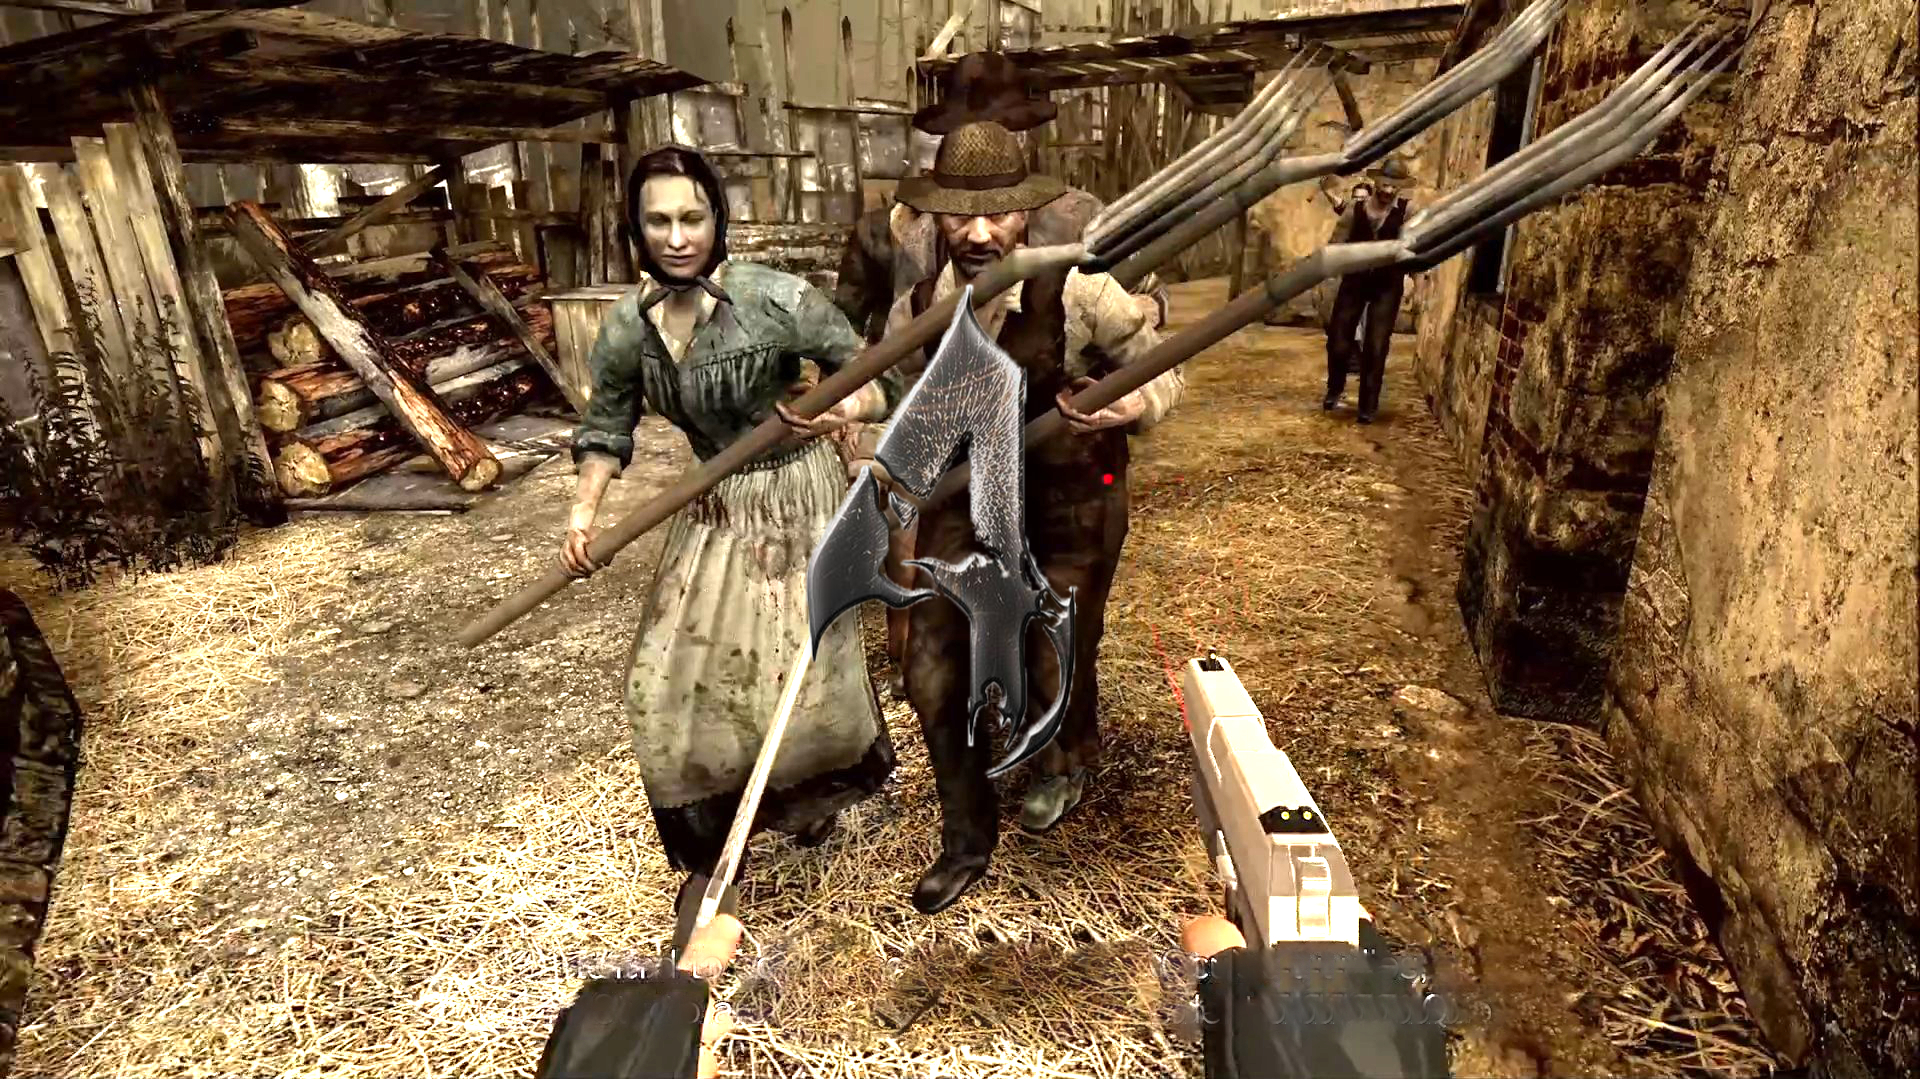 Resident Evil 4 VR mod looks terrifying from a first-person perspective